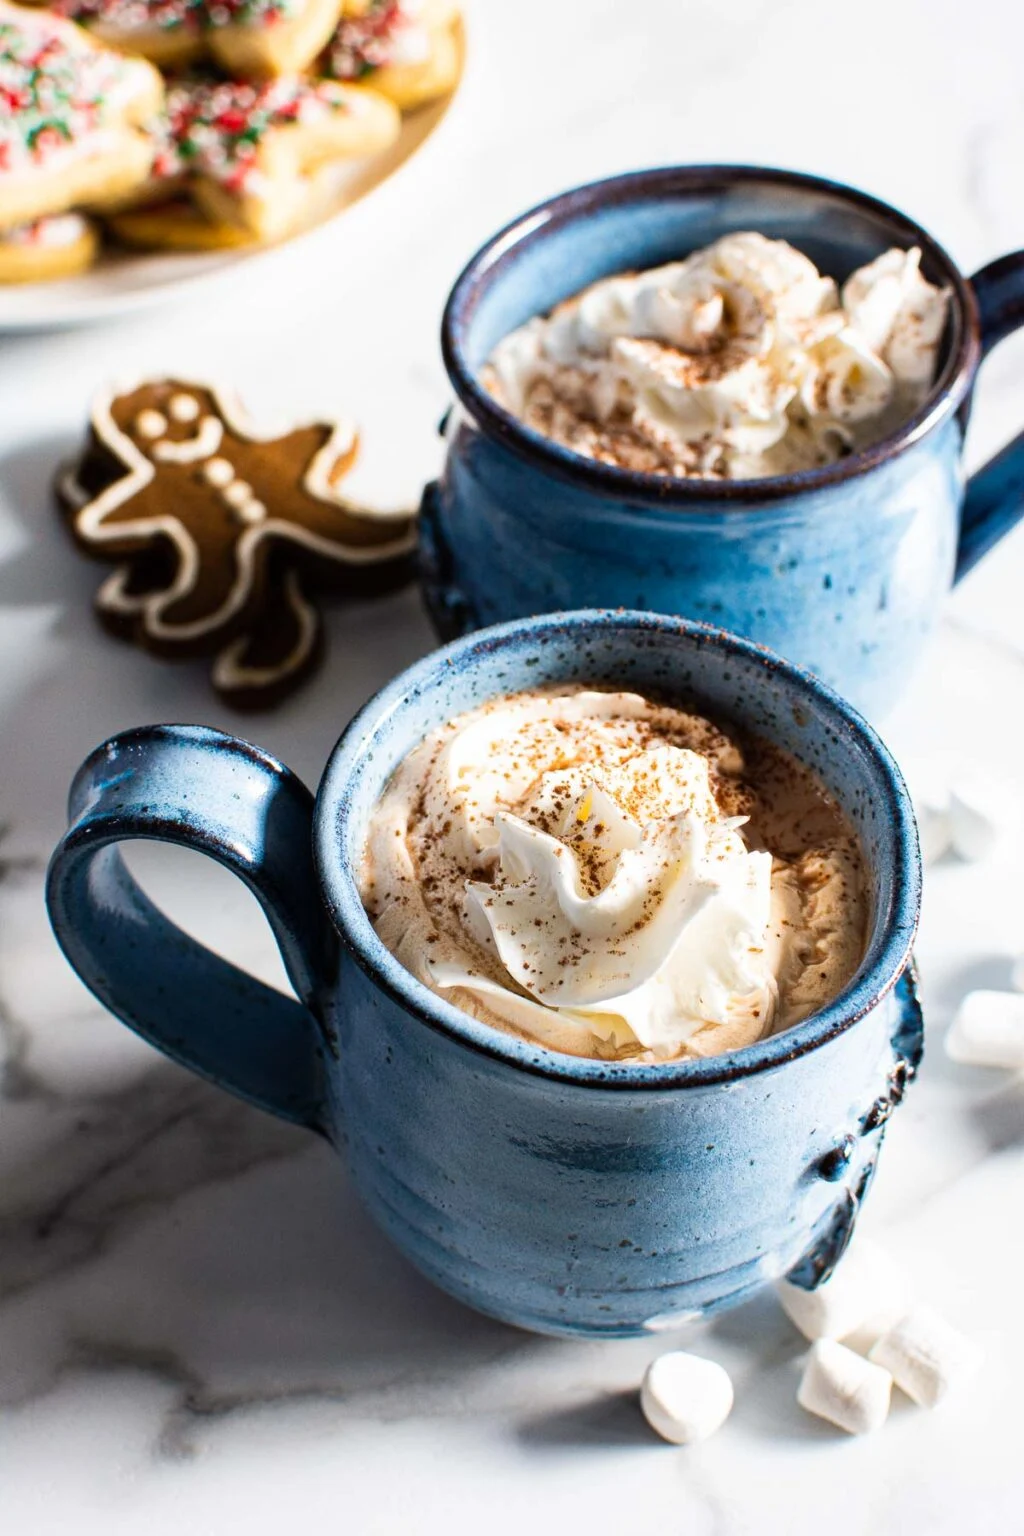 healthy hot chocolate with whipped cream in blue mugs.
